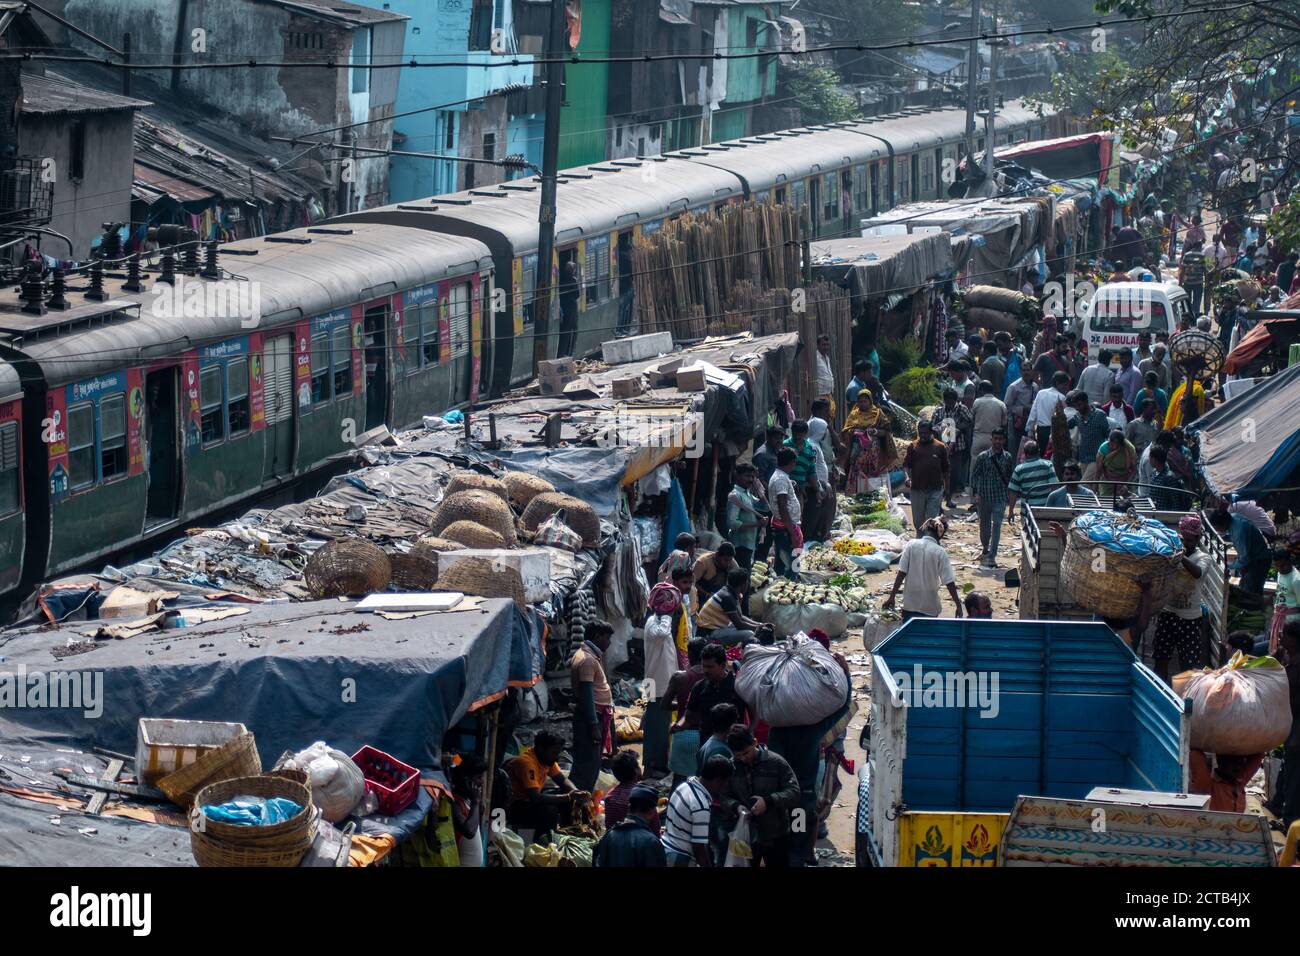 Kolkata, India - February 2, 2020: Unidentified people attends Mallick Ghat flower market by Howrah bridge and a train passes by on February 2, 2020 Stock Photo